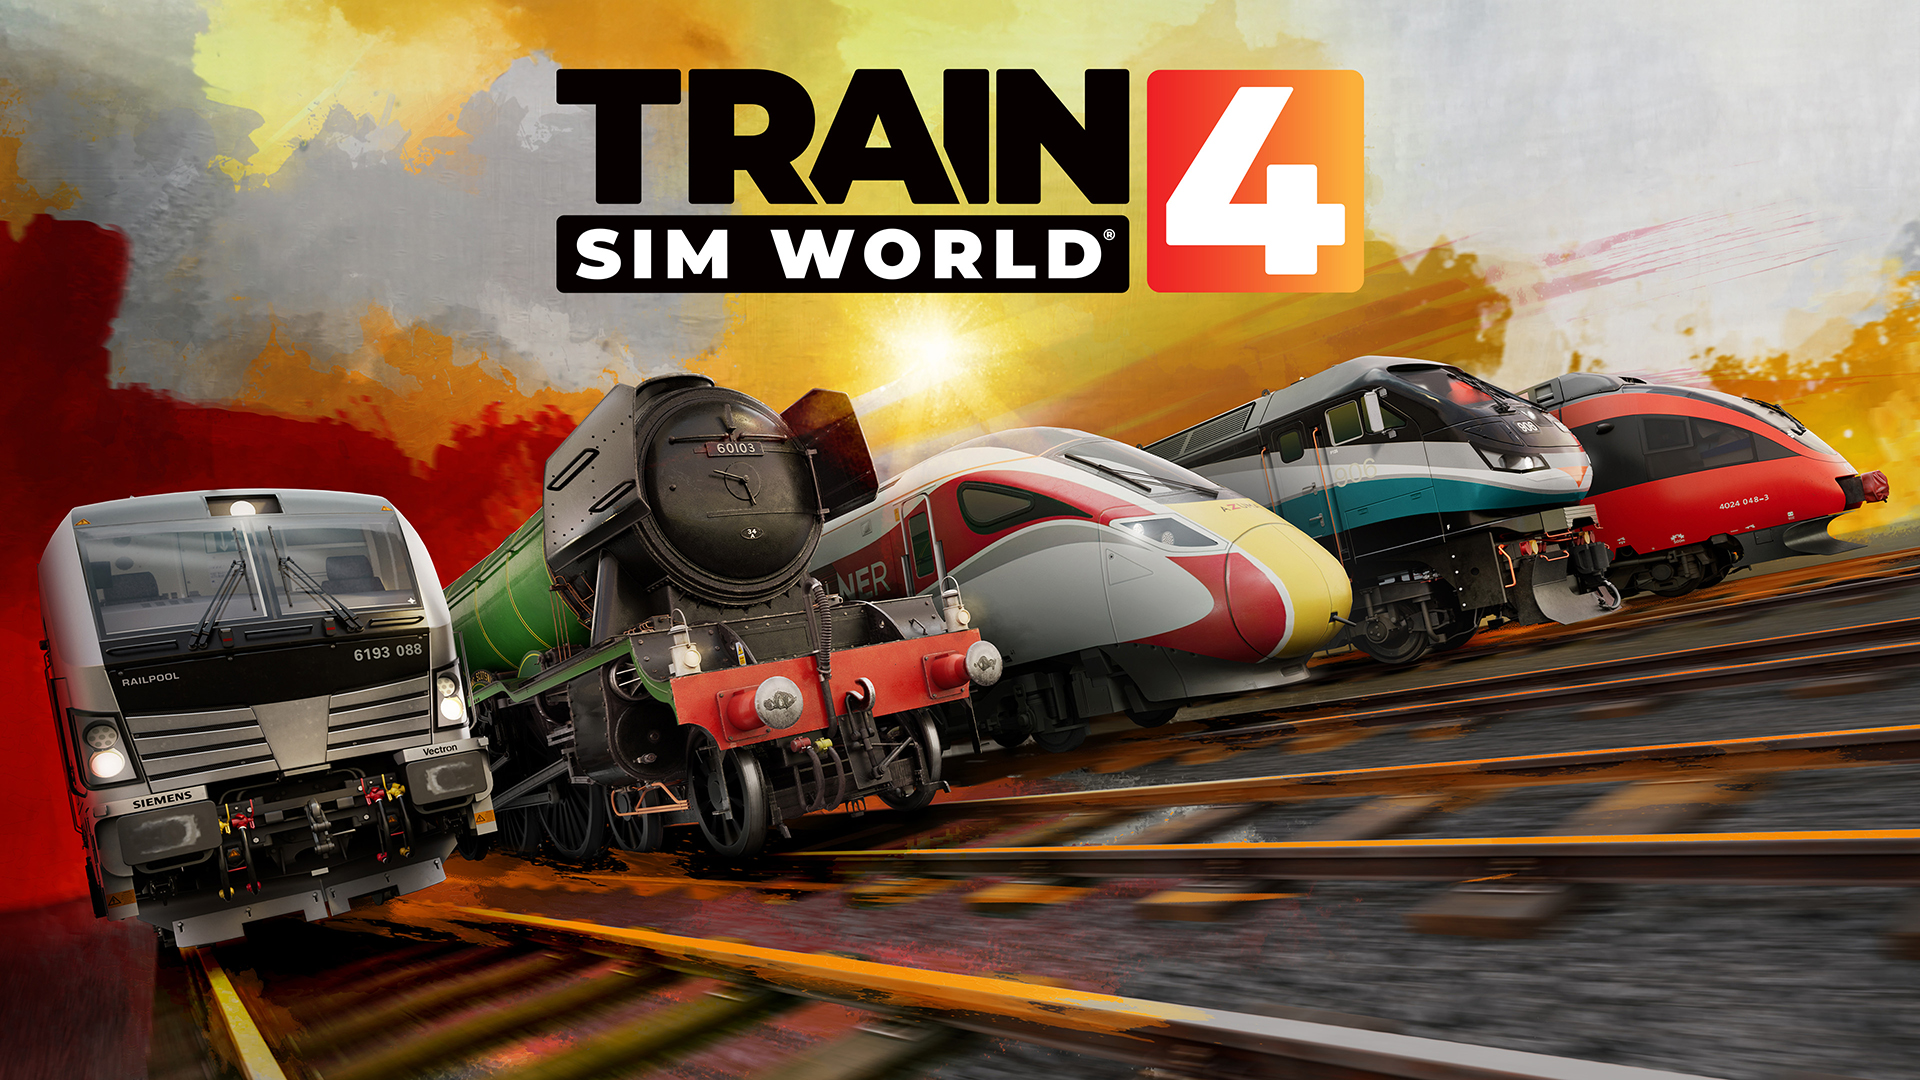 Hit the tracks Train Sim World 4 release date confirmed for Xbox